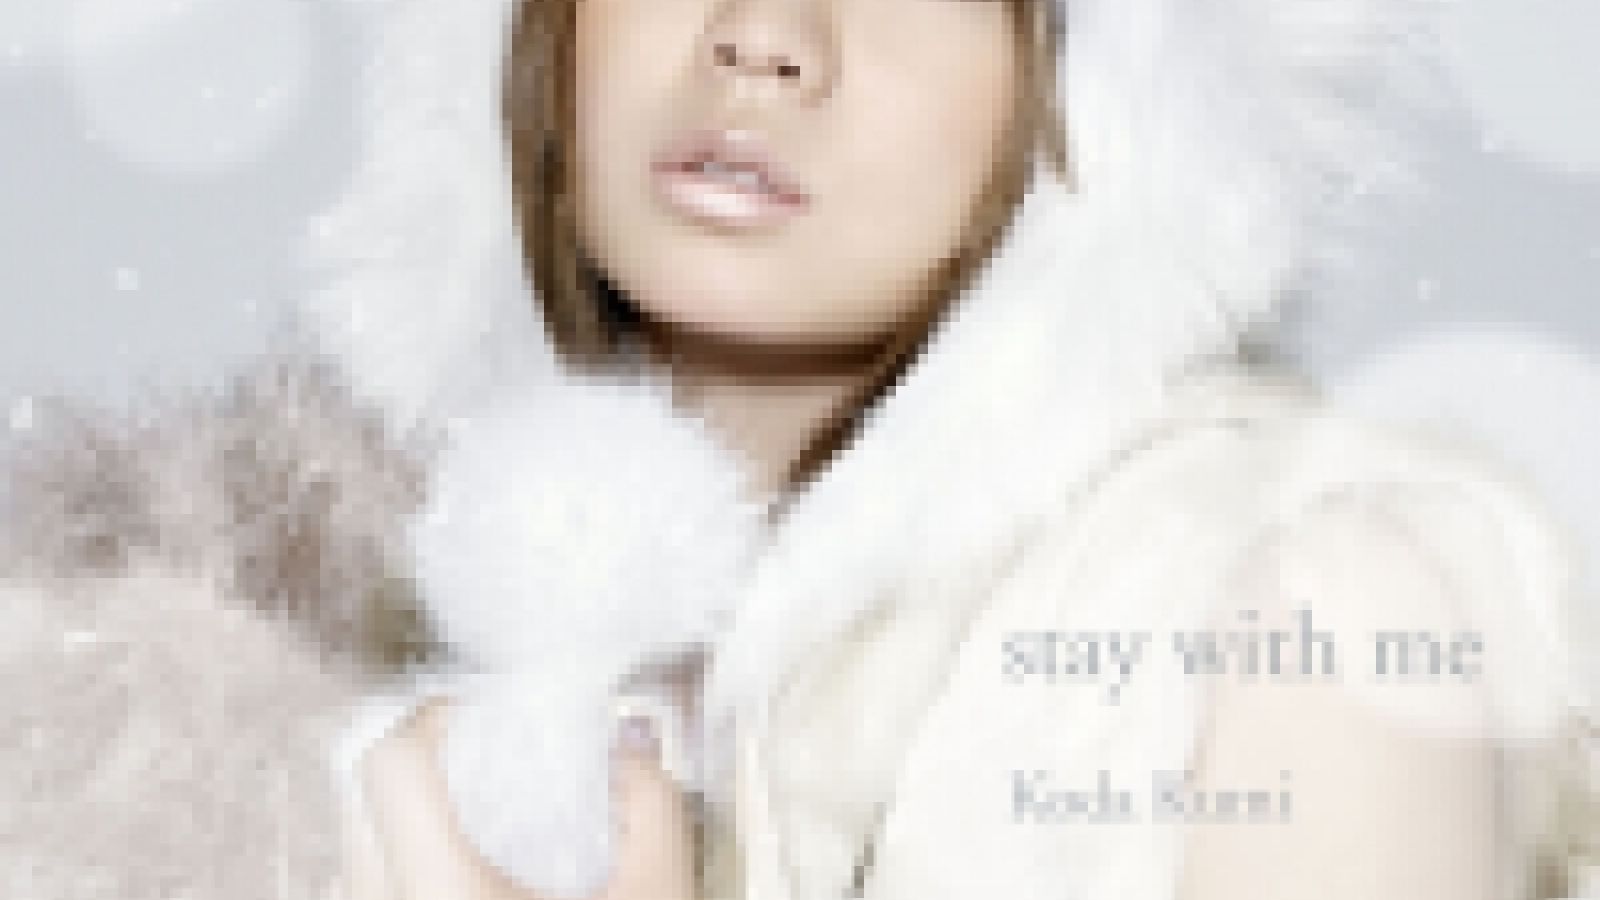 Koda Kumi - stay with me © avex Inc. All rights reserved.